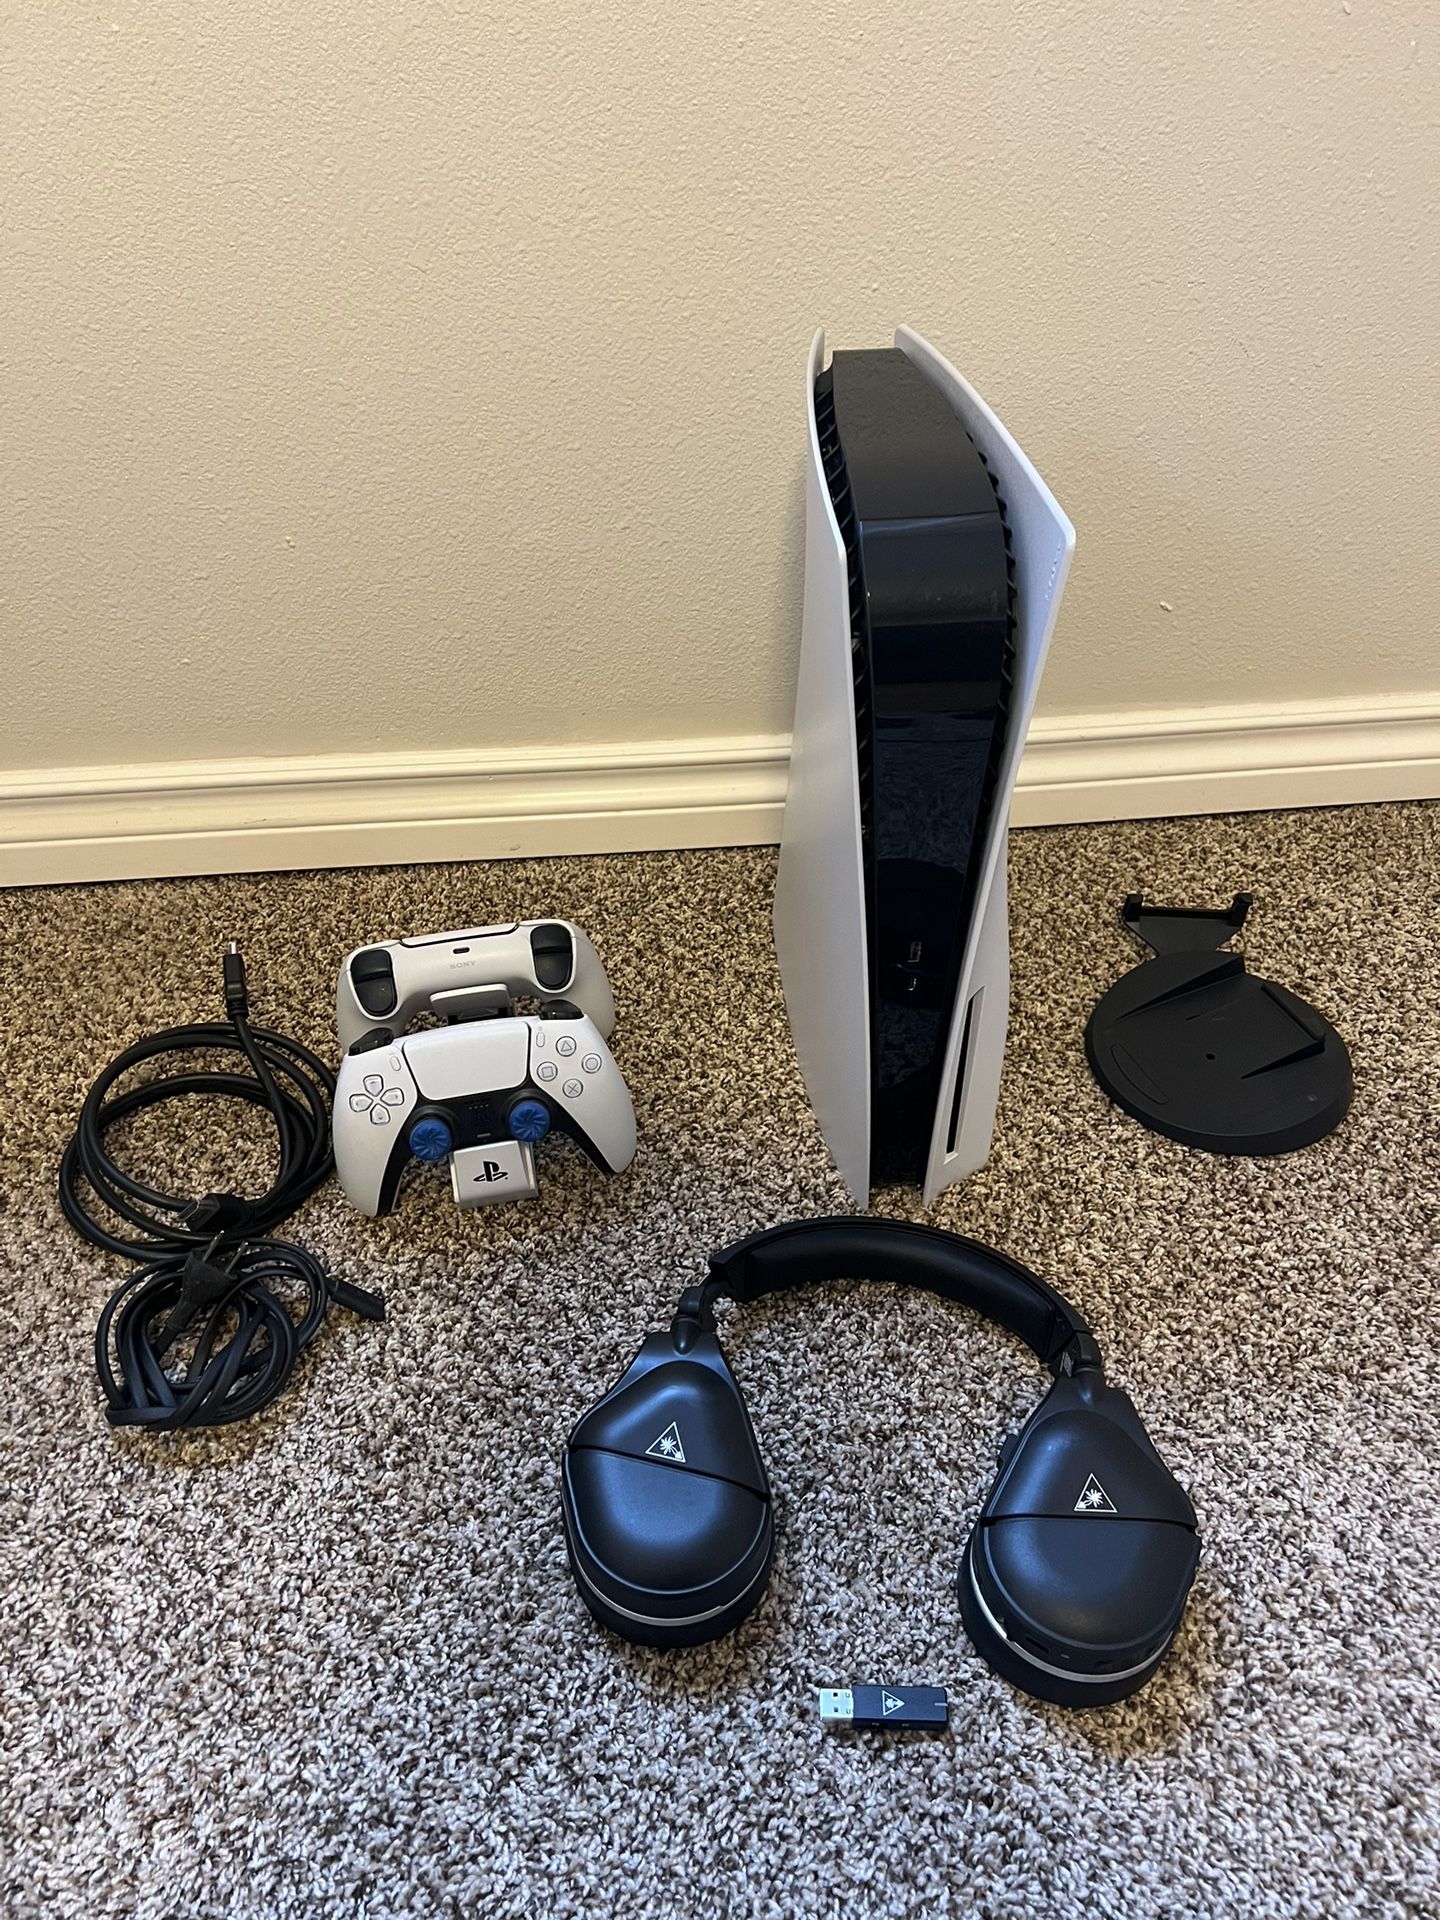 PS5, 2 Controllers/Charger, Turtle Beach Stealth Gen 2 Headset